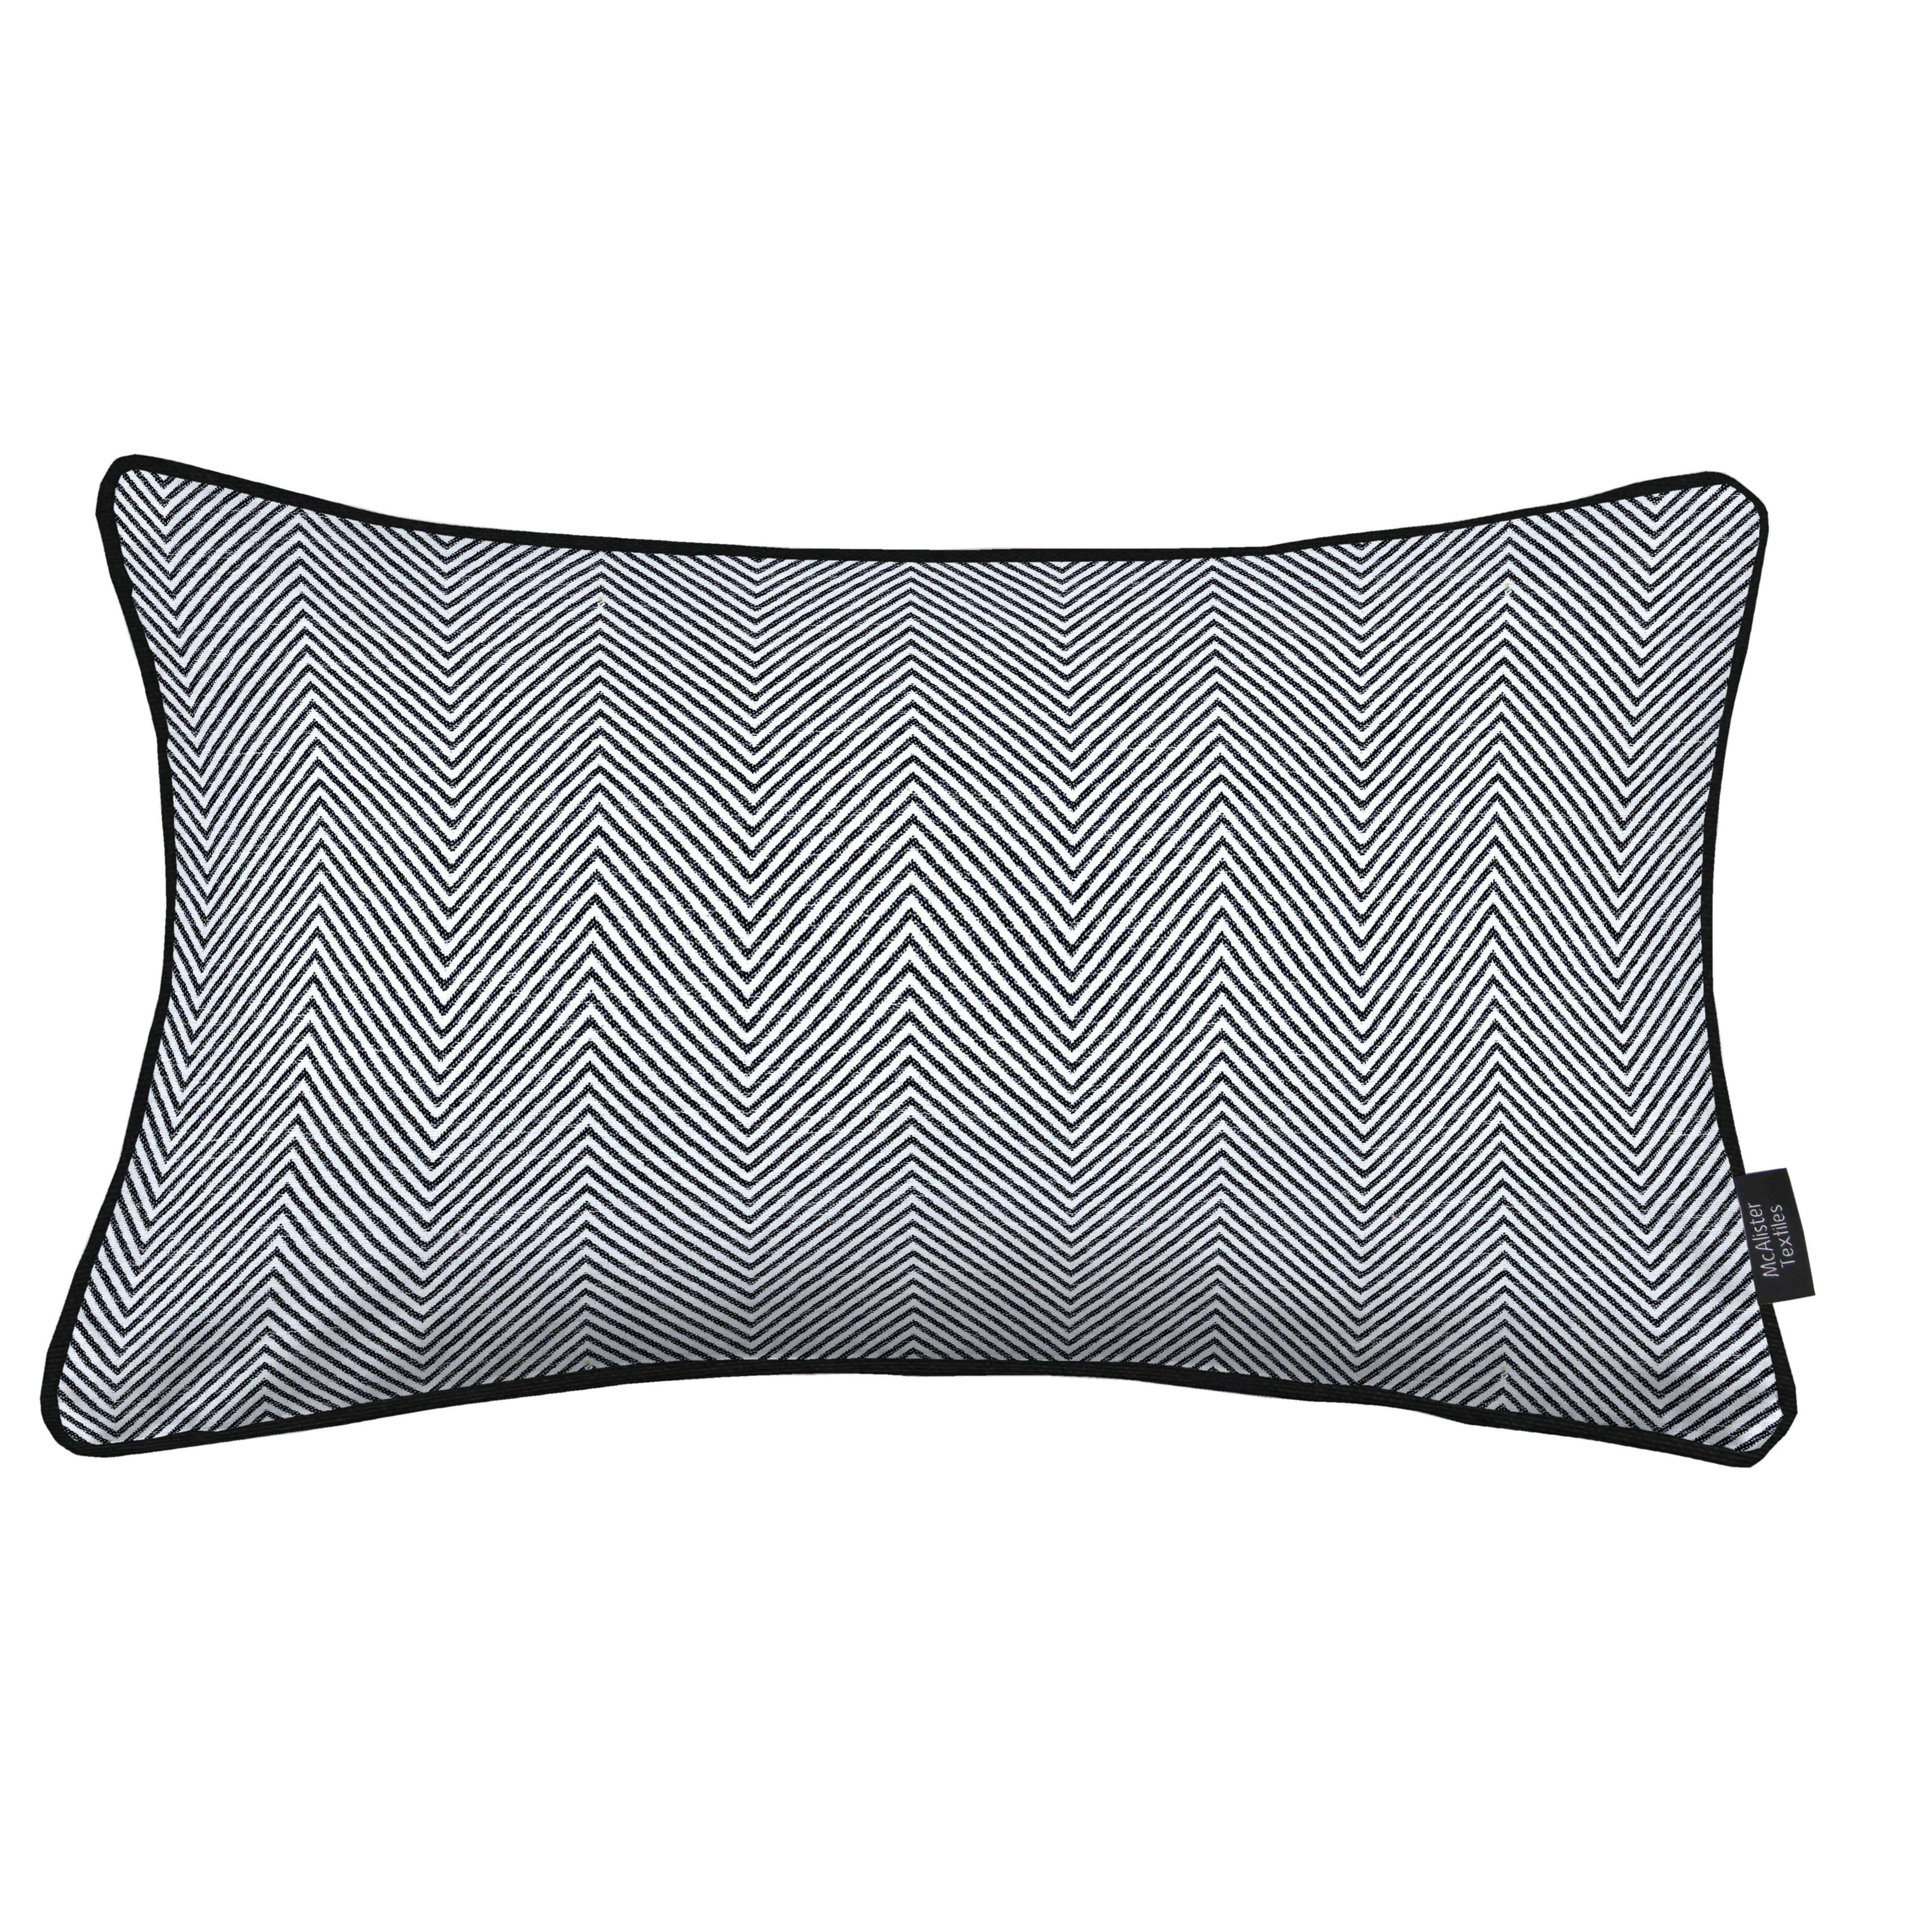 Herringbone Twill Black + White Abstract Pillow, Cover Only / 50cm x 30cm